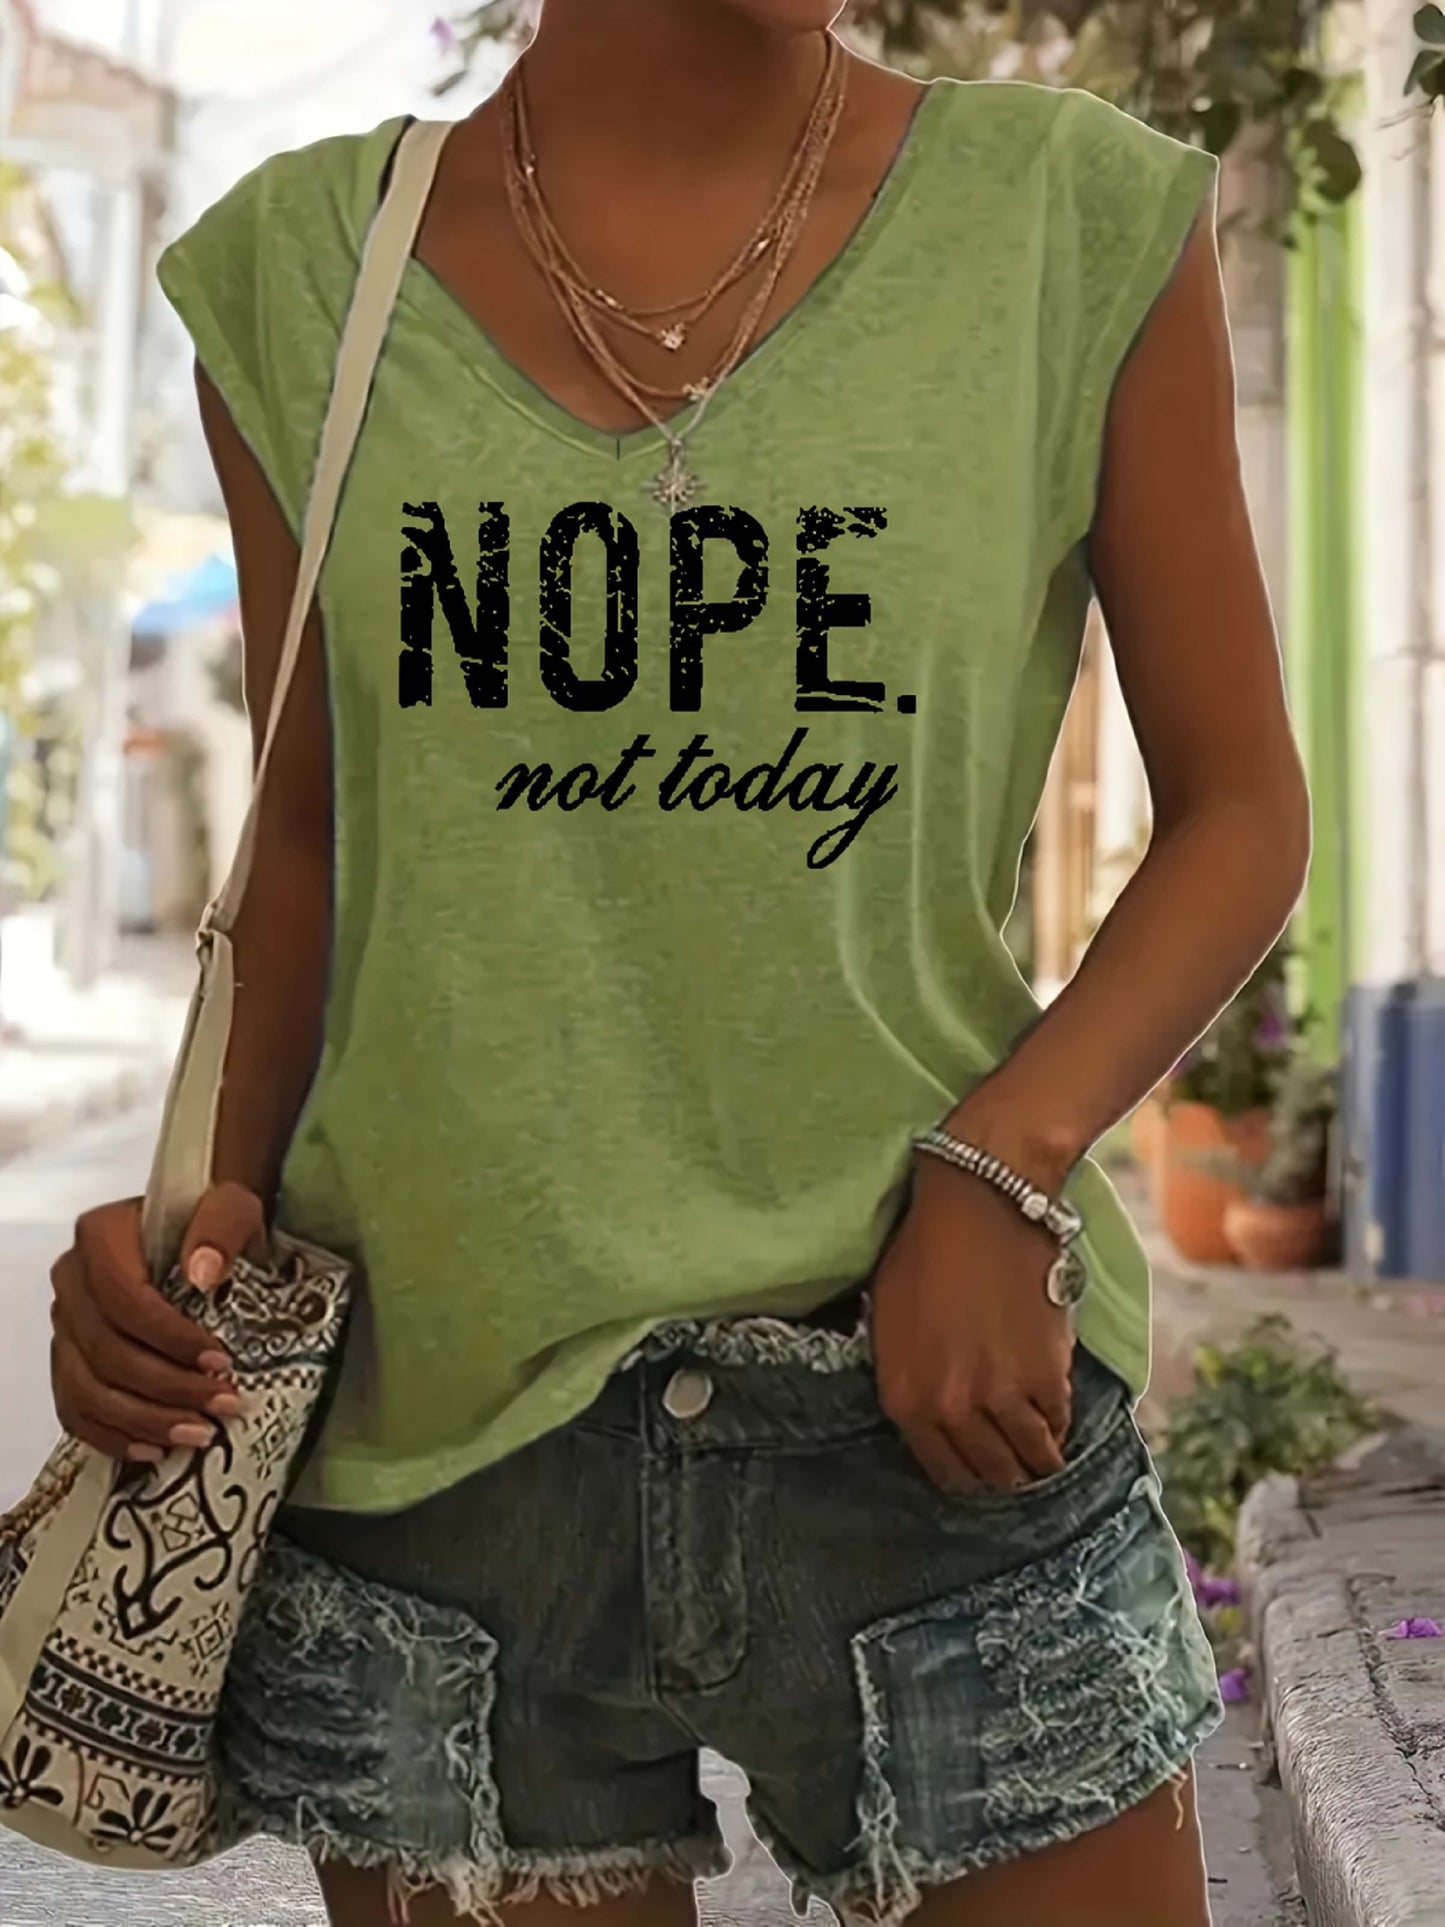 "Nope. Not Today" Letter Print T-shirts, V-neck Cap Sleeve Fashion Top, Women's Clothing